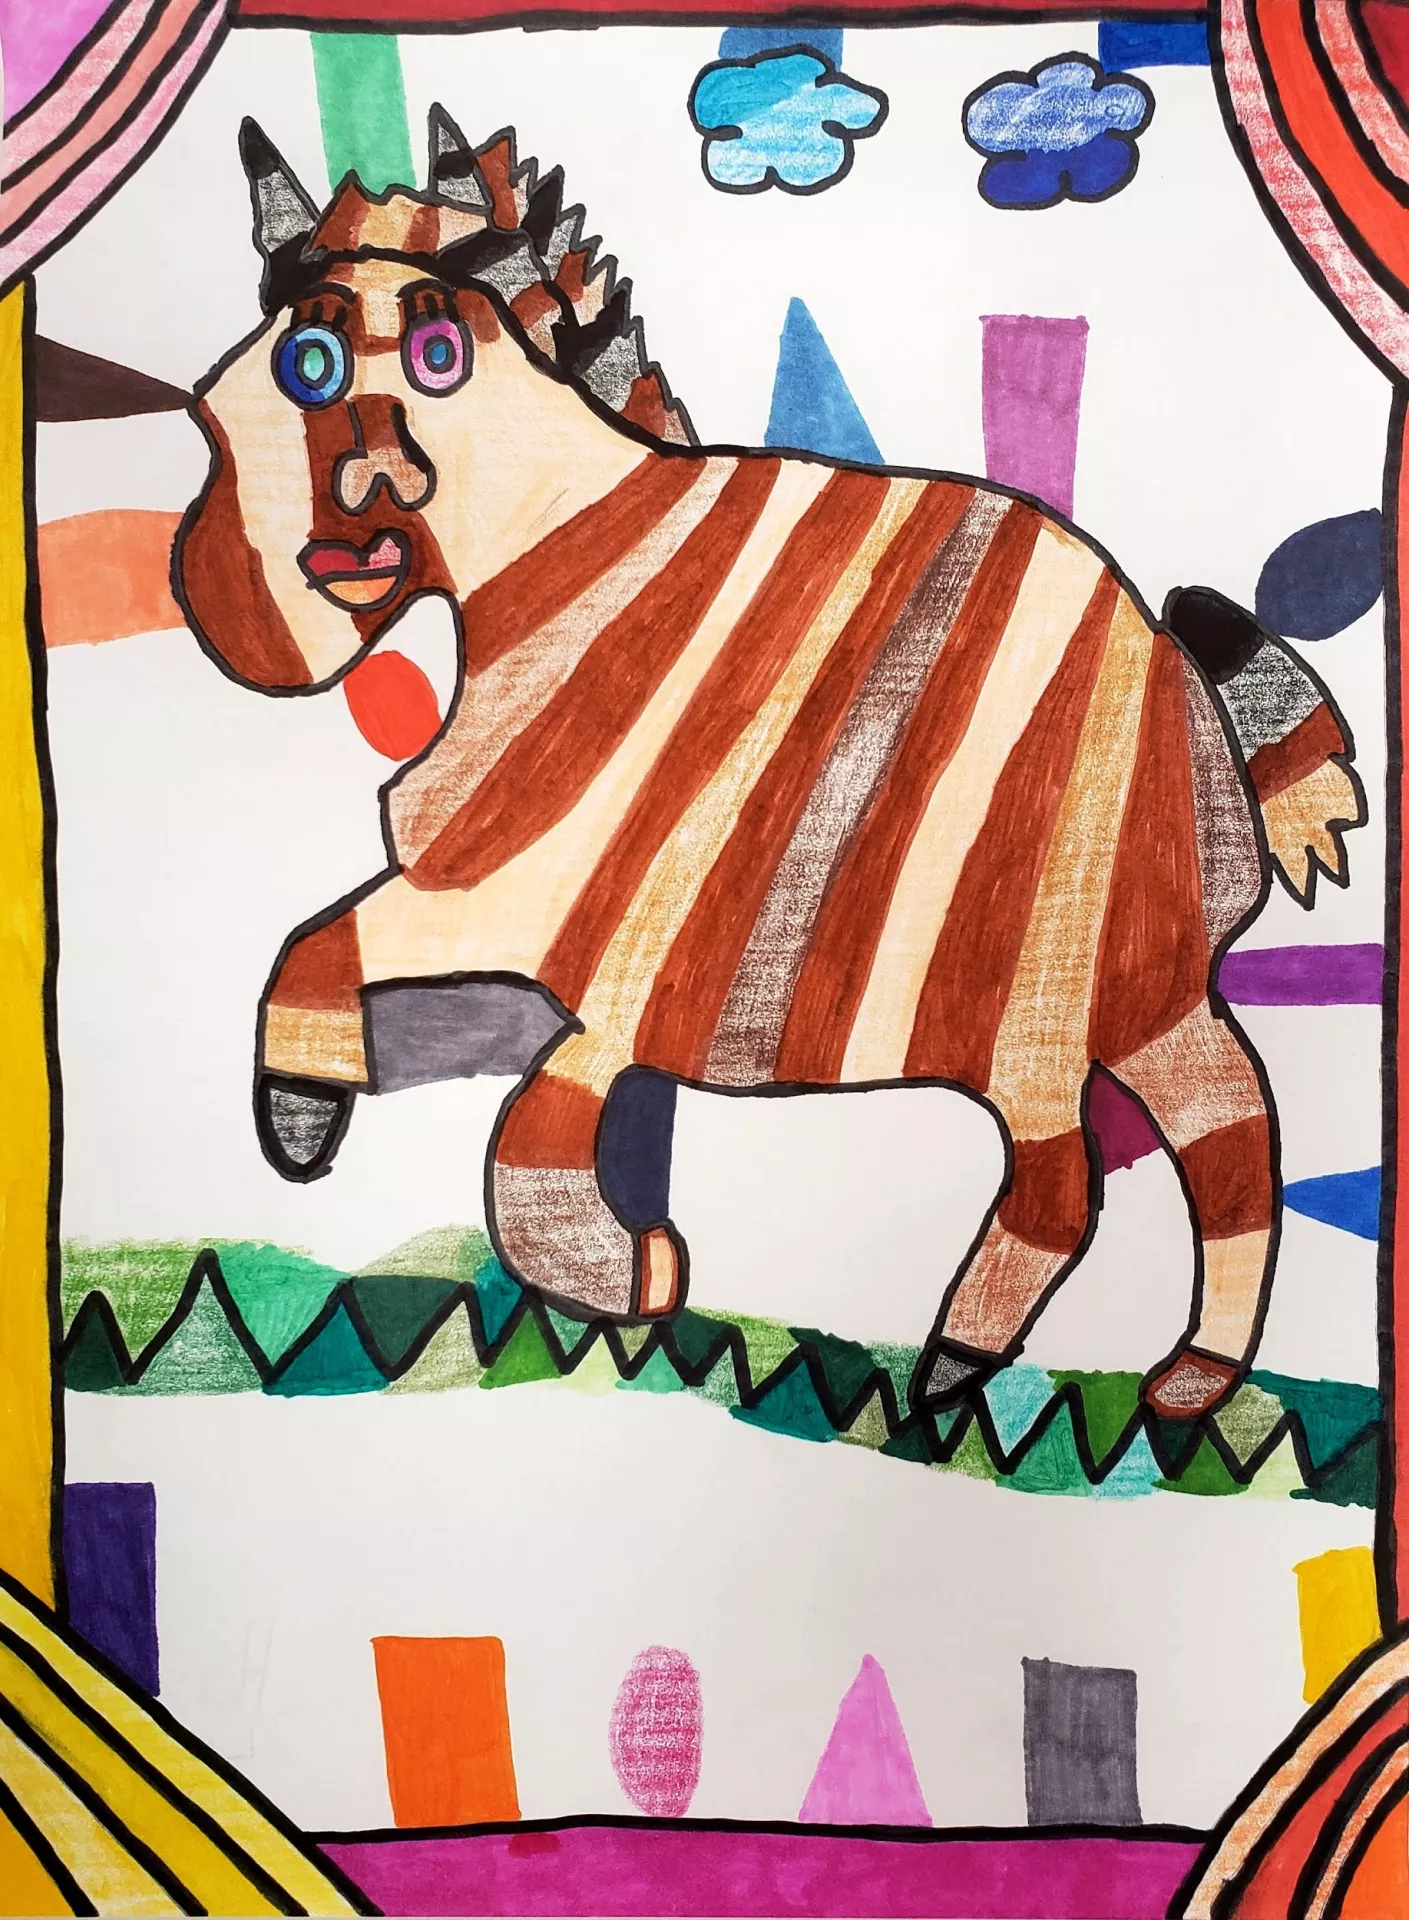 A whimsical zebra with vertical brown, gray, and cream striped markings prances through a field with colorful, abstract geometric shapes within a border design. 